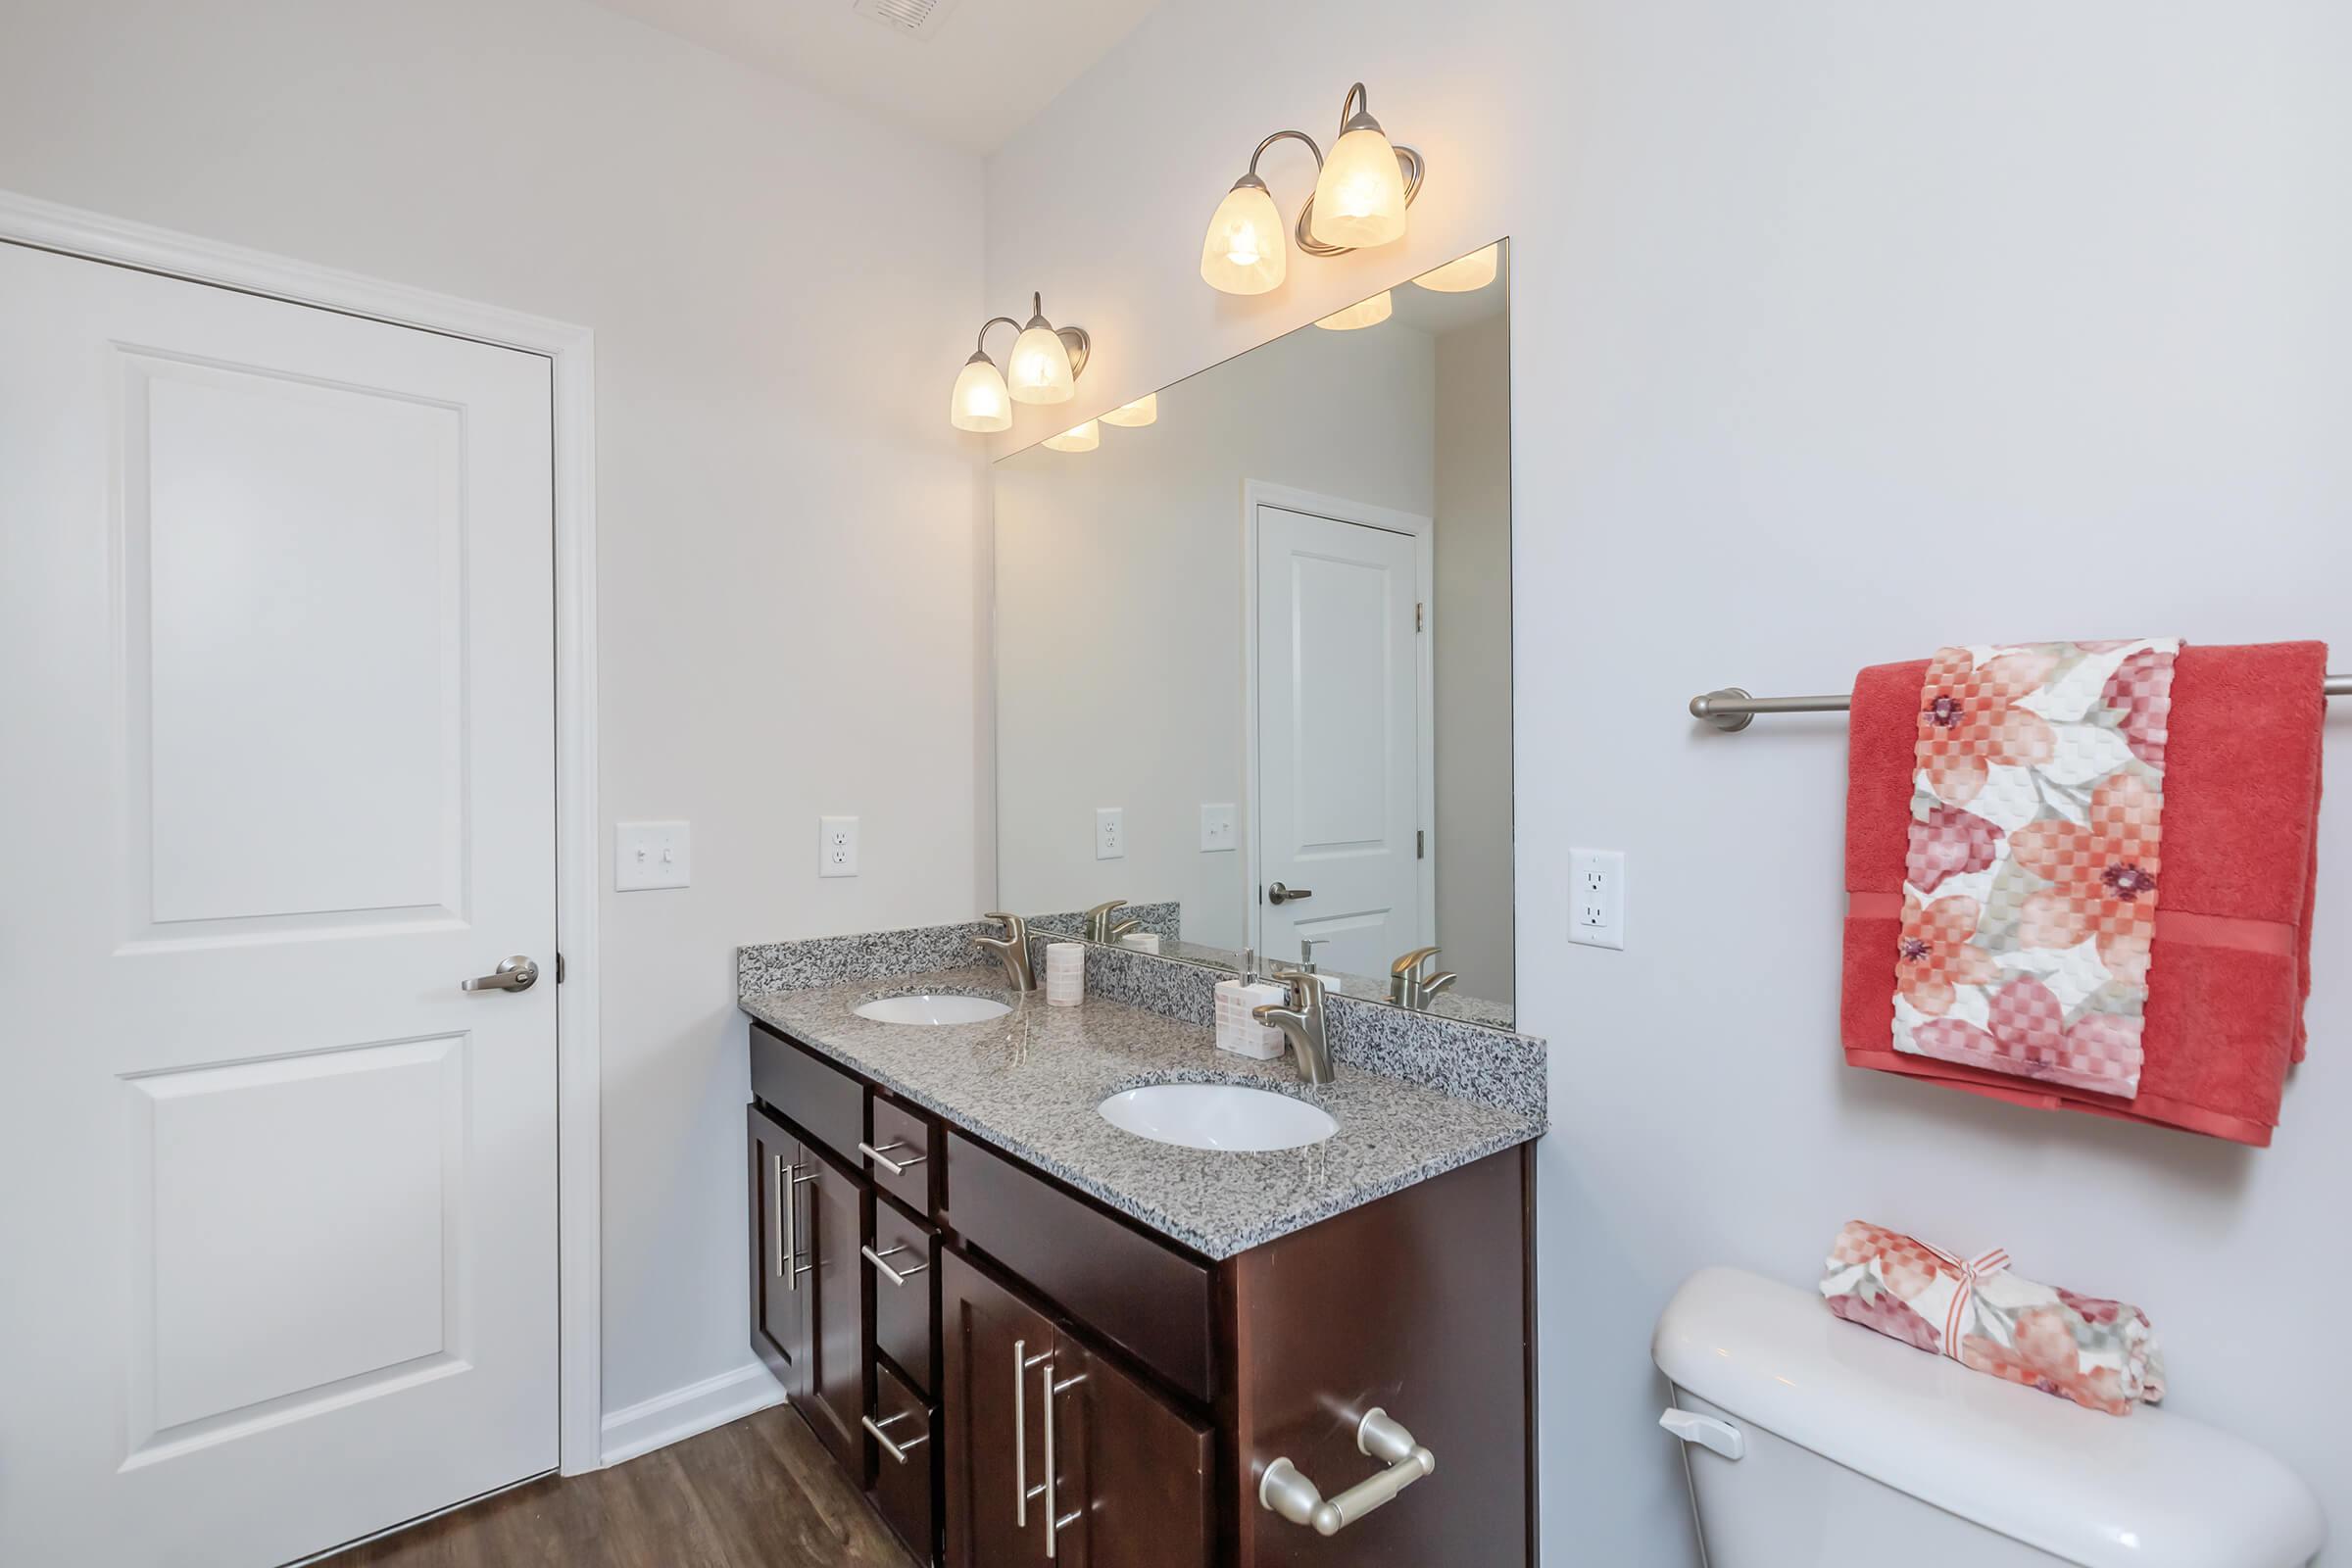 Clarendon Has Modern Bathrooms In Riverstone Apartments At Long Shoals In Arden, NC